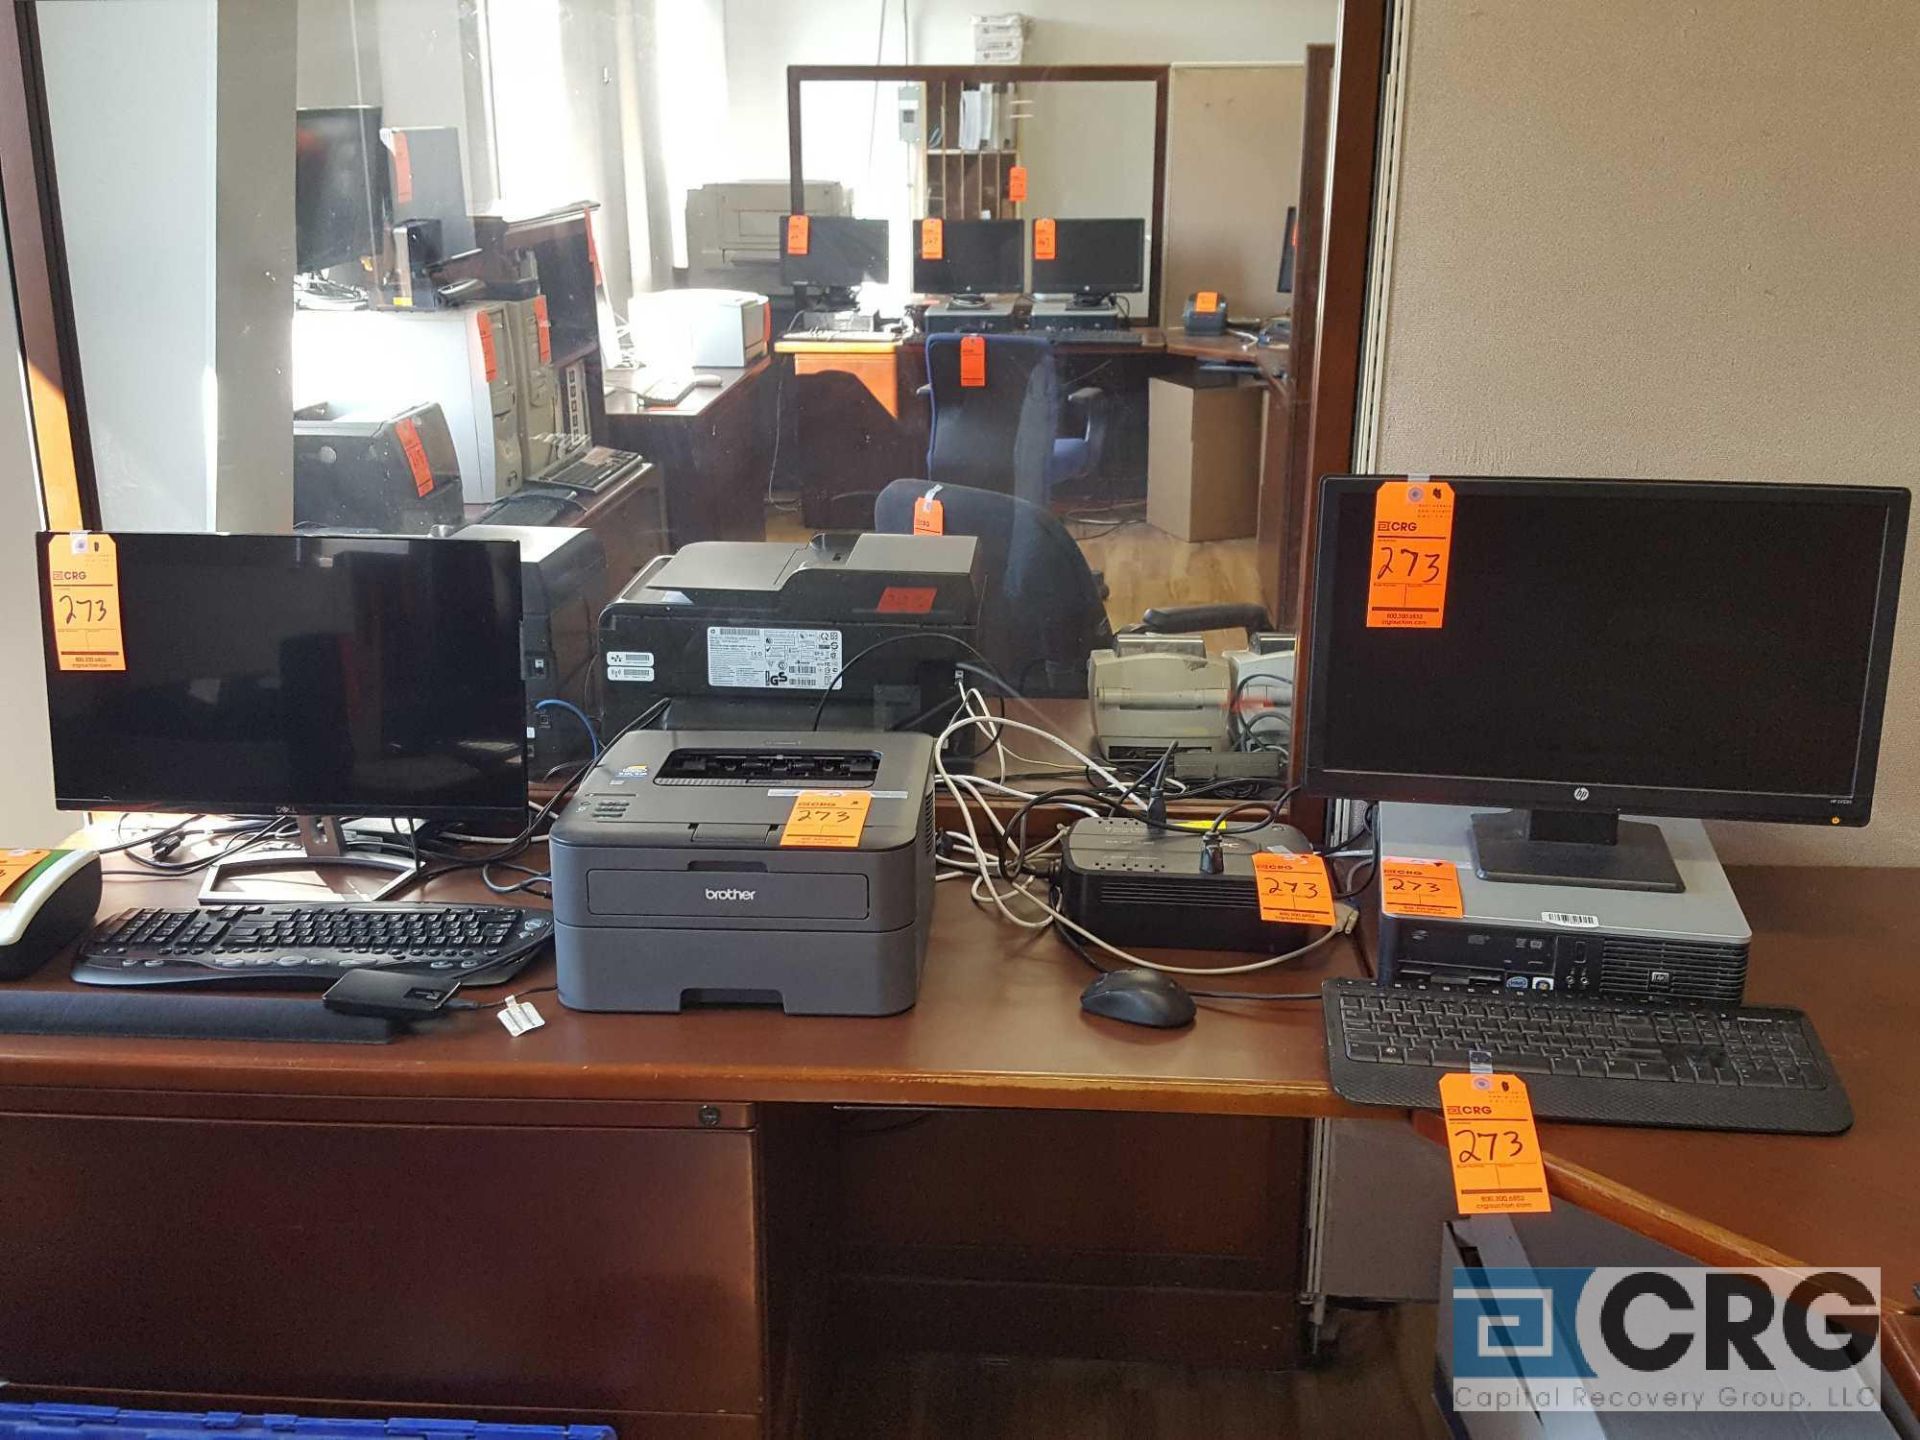 Lot of assorted computers, monitors, keyboards, printer, and accessories etc